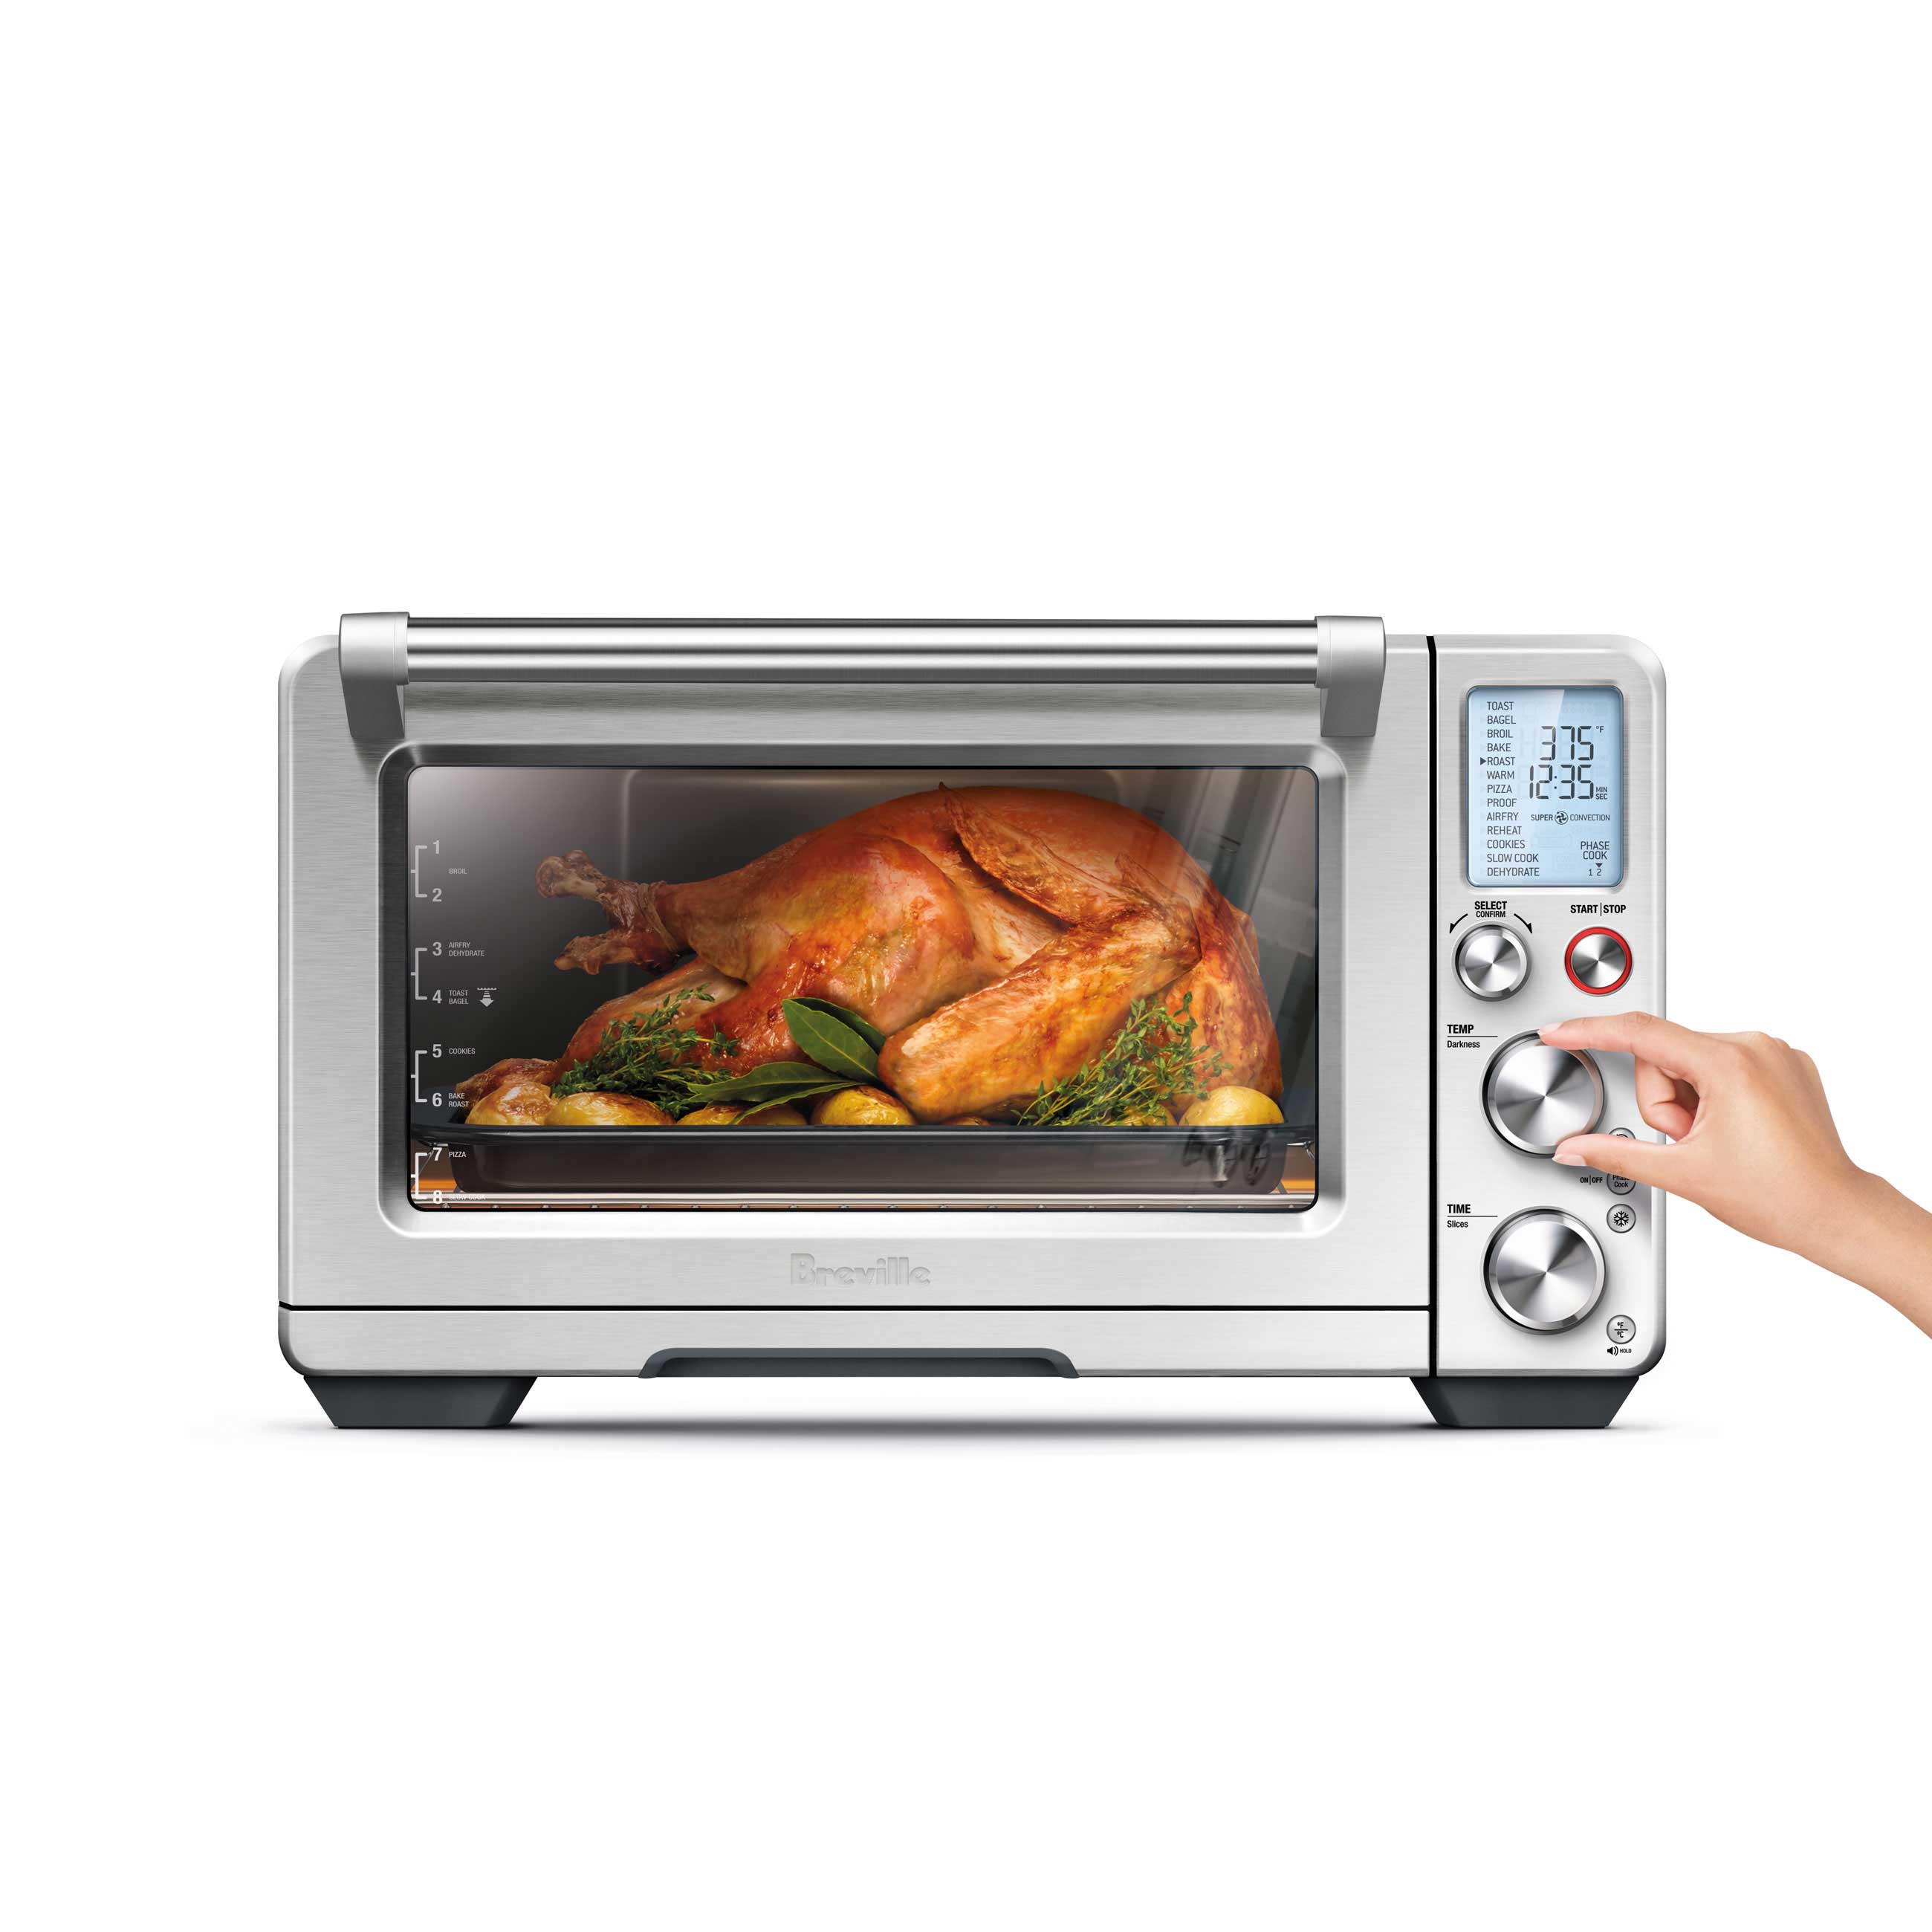 The Smart Oven Air Fryer Breville